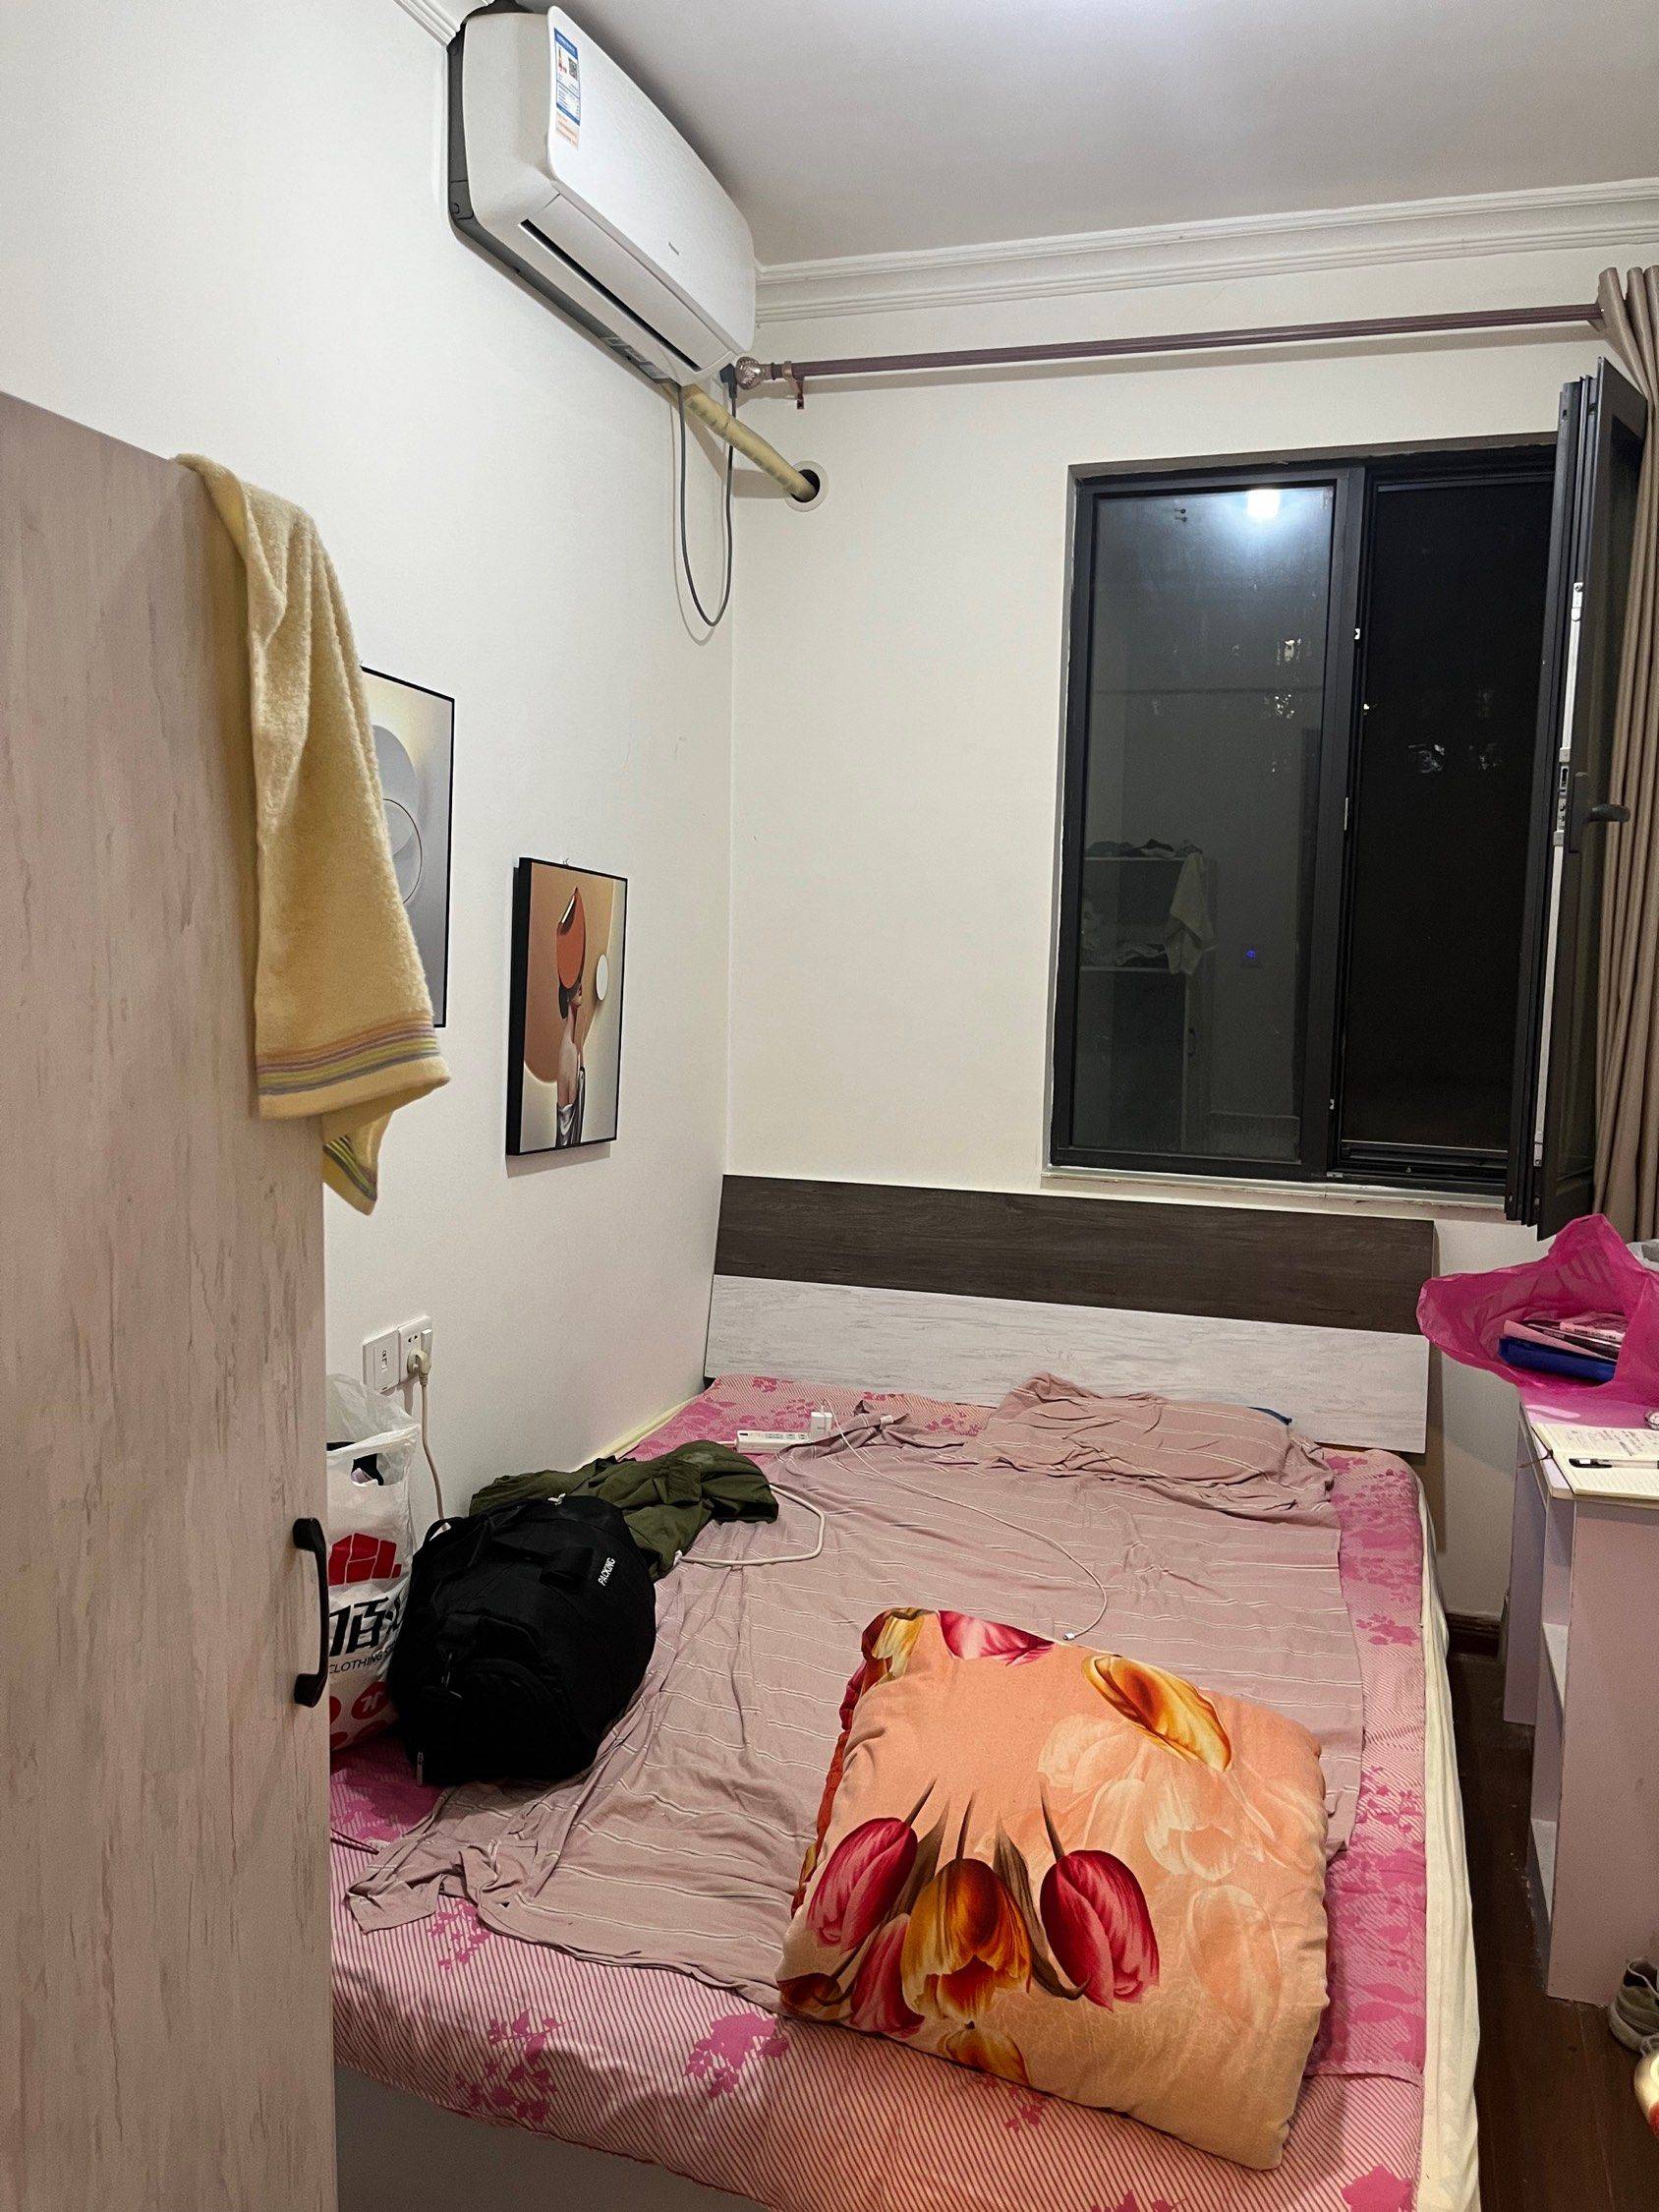 Xi'An-Yanta-Cozy Home,No Gender Limit,Chilled